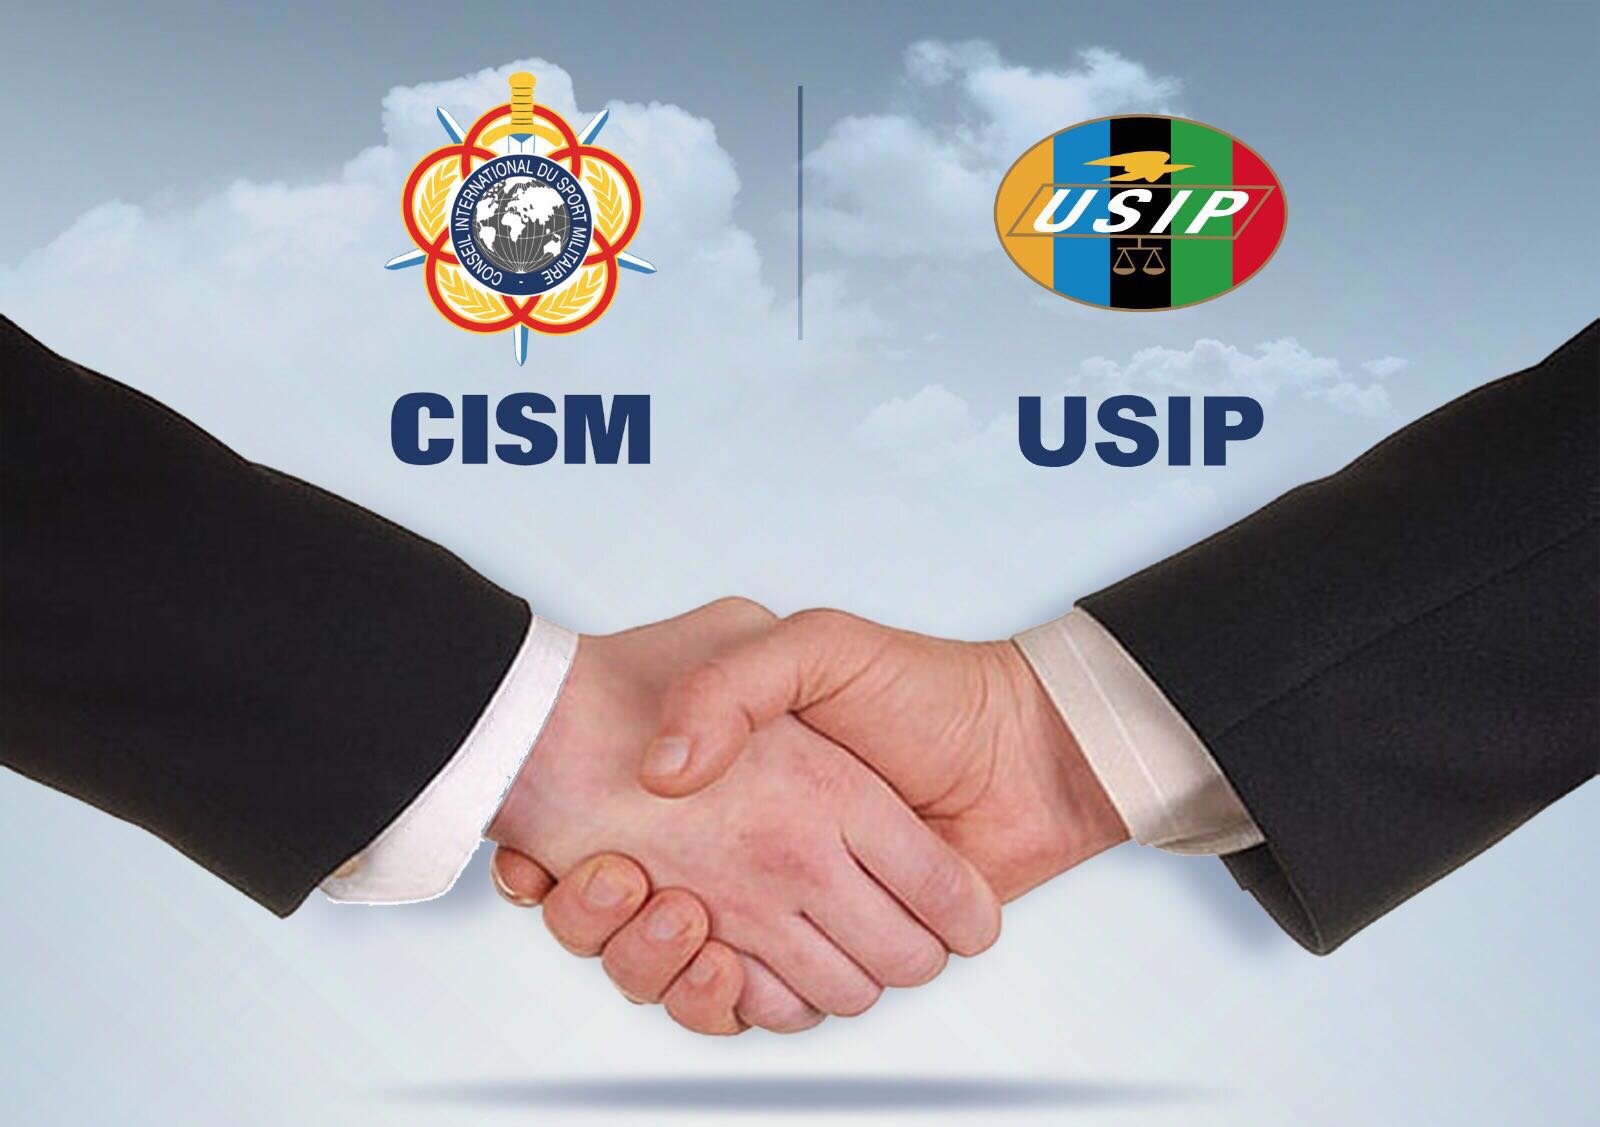 CISM and USIP shake hands